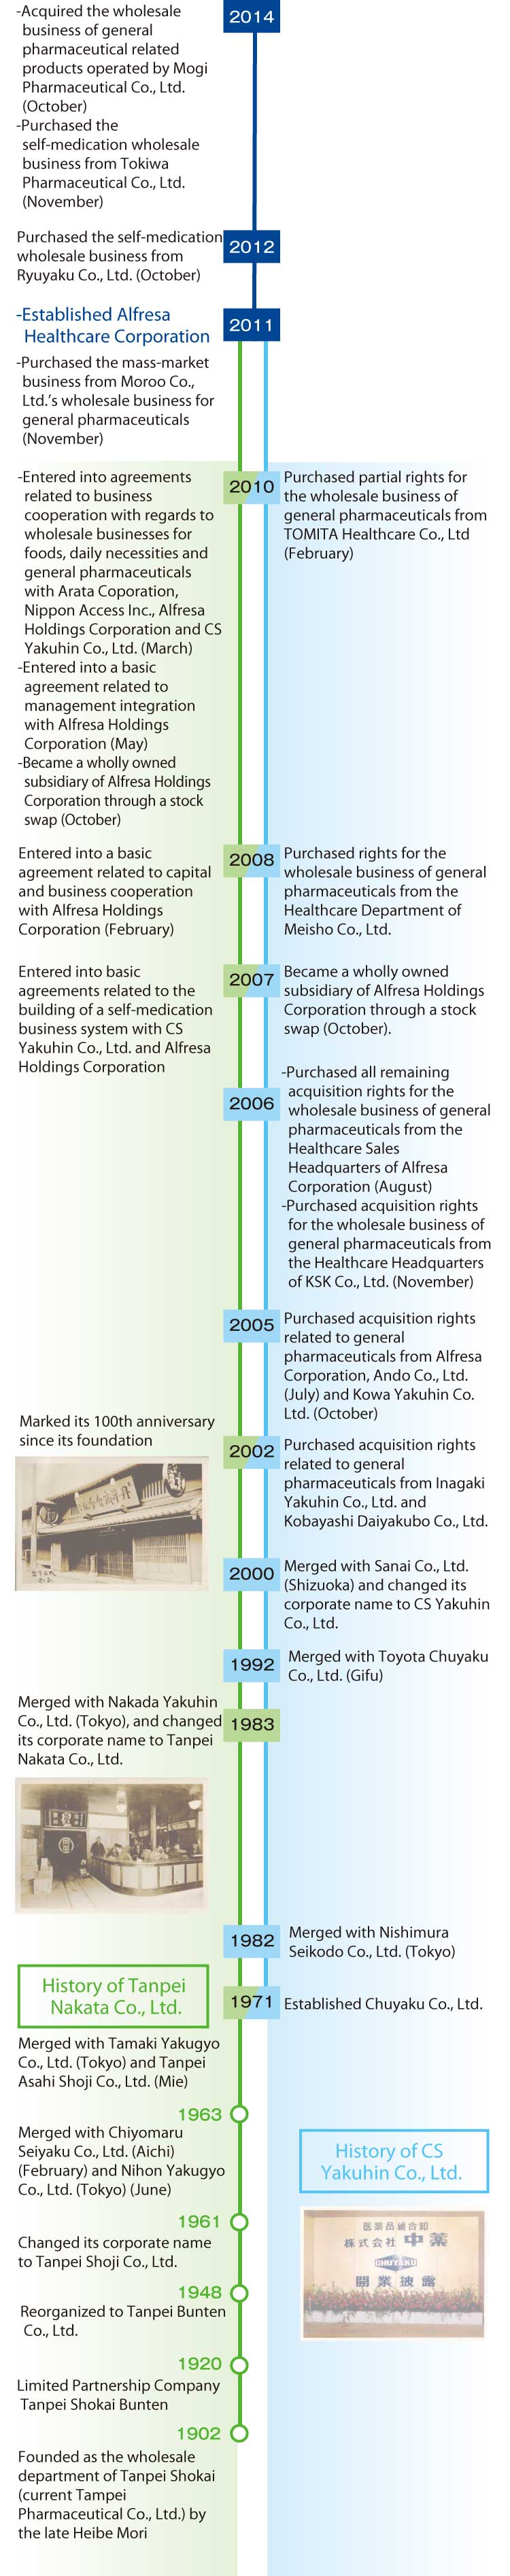 A Historical Development of AHC